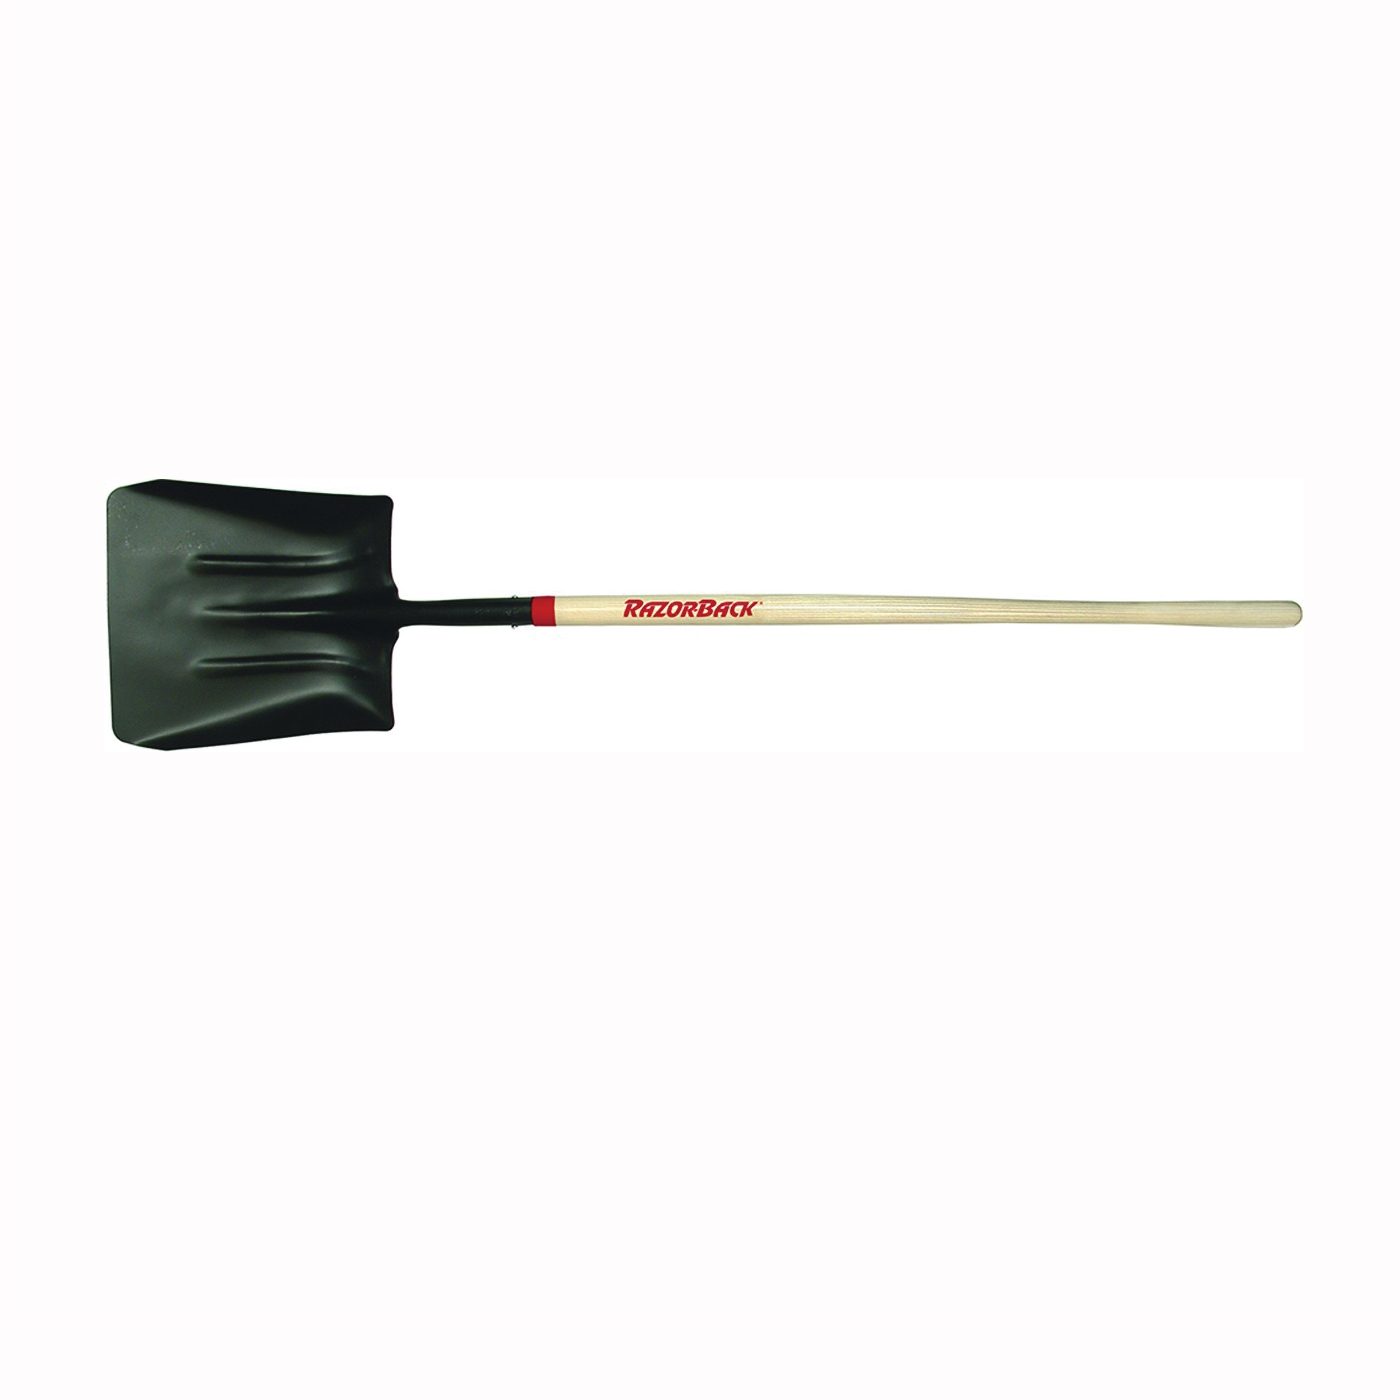 54246 Coal and Street Shovel, 13-1/2 in W Blade, 14-1/2 in L Blade, Steel Blade, Straight Handle